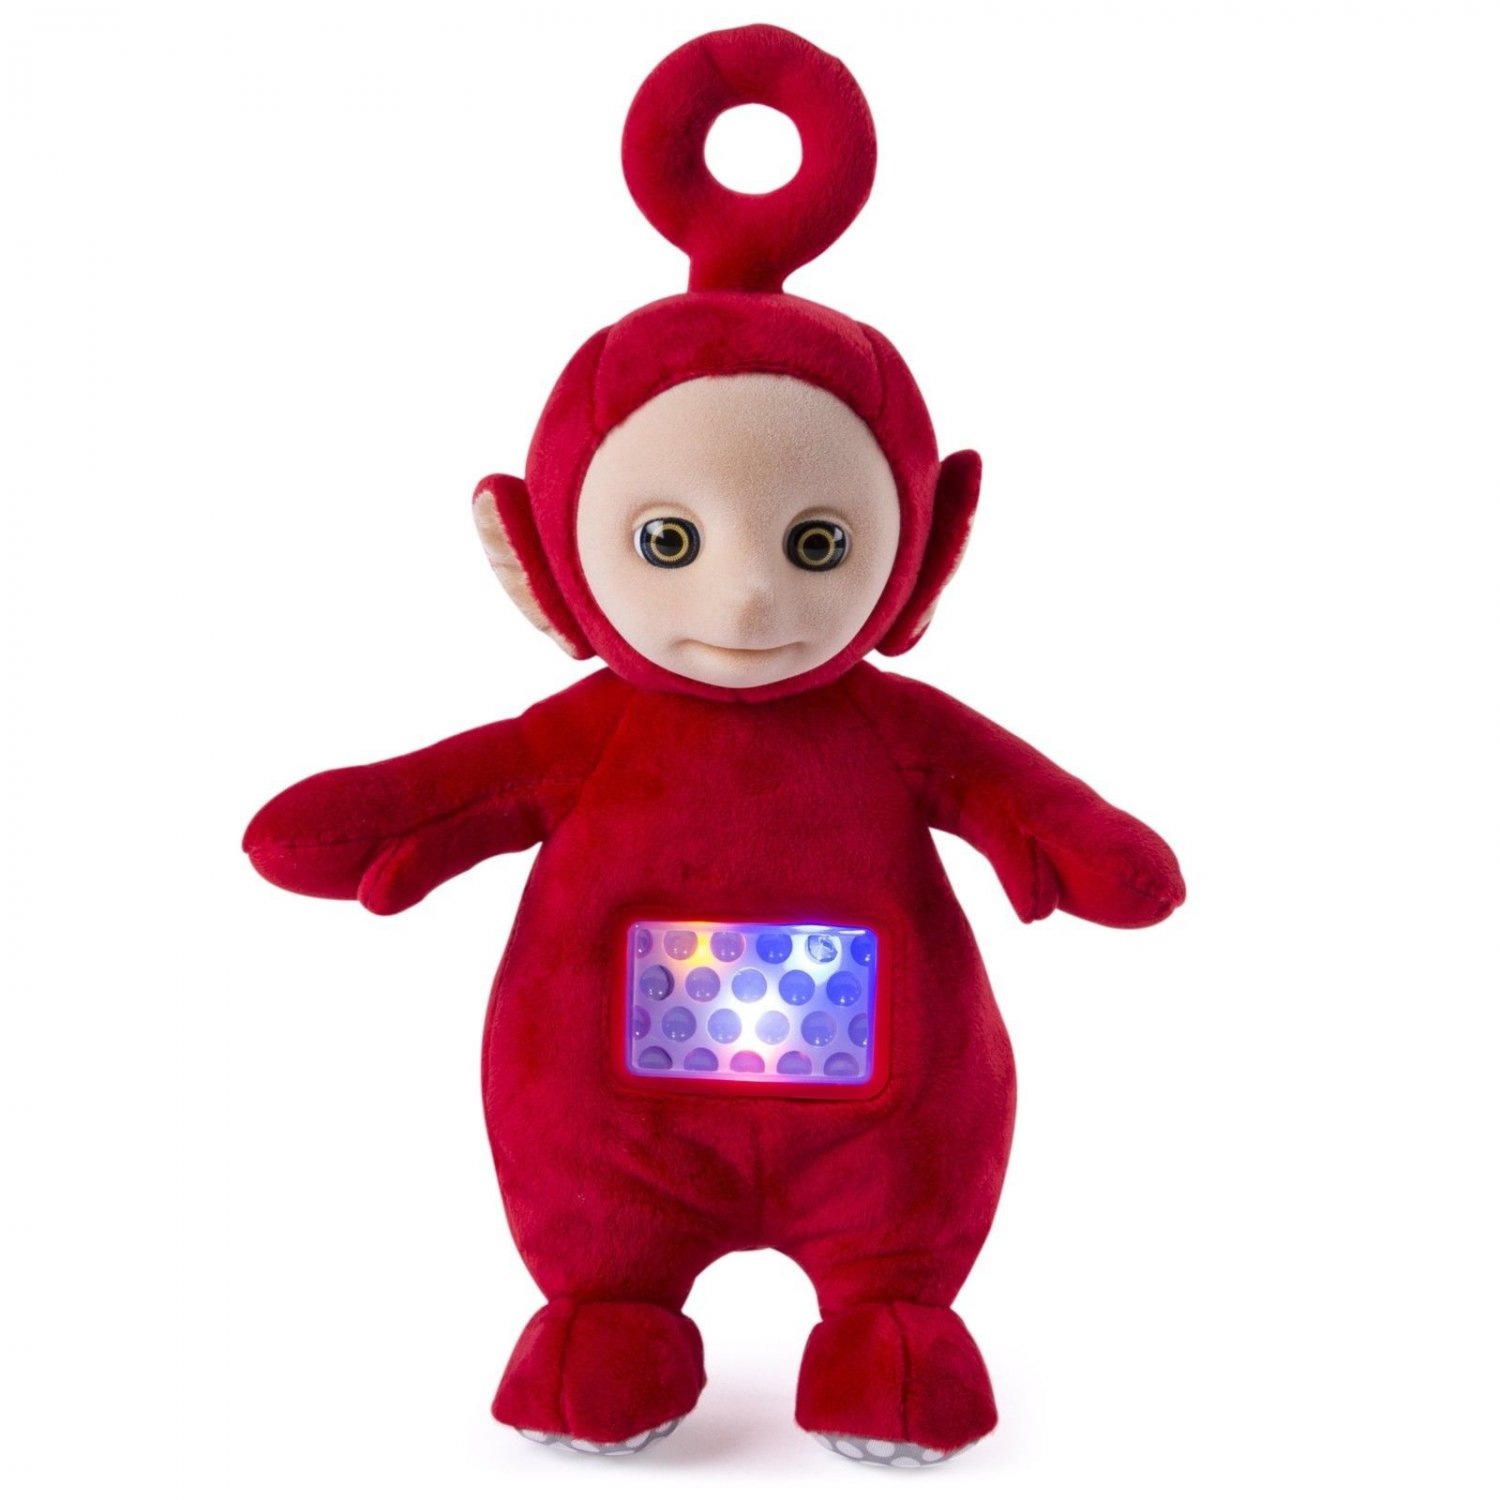 Teletubbies Po Loveable Soft Toy Child Musical Kids Gift Cute Plush